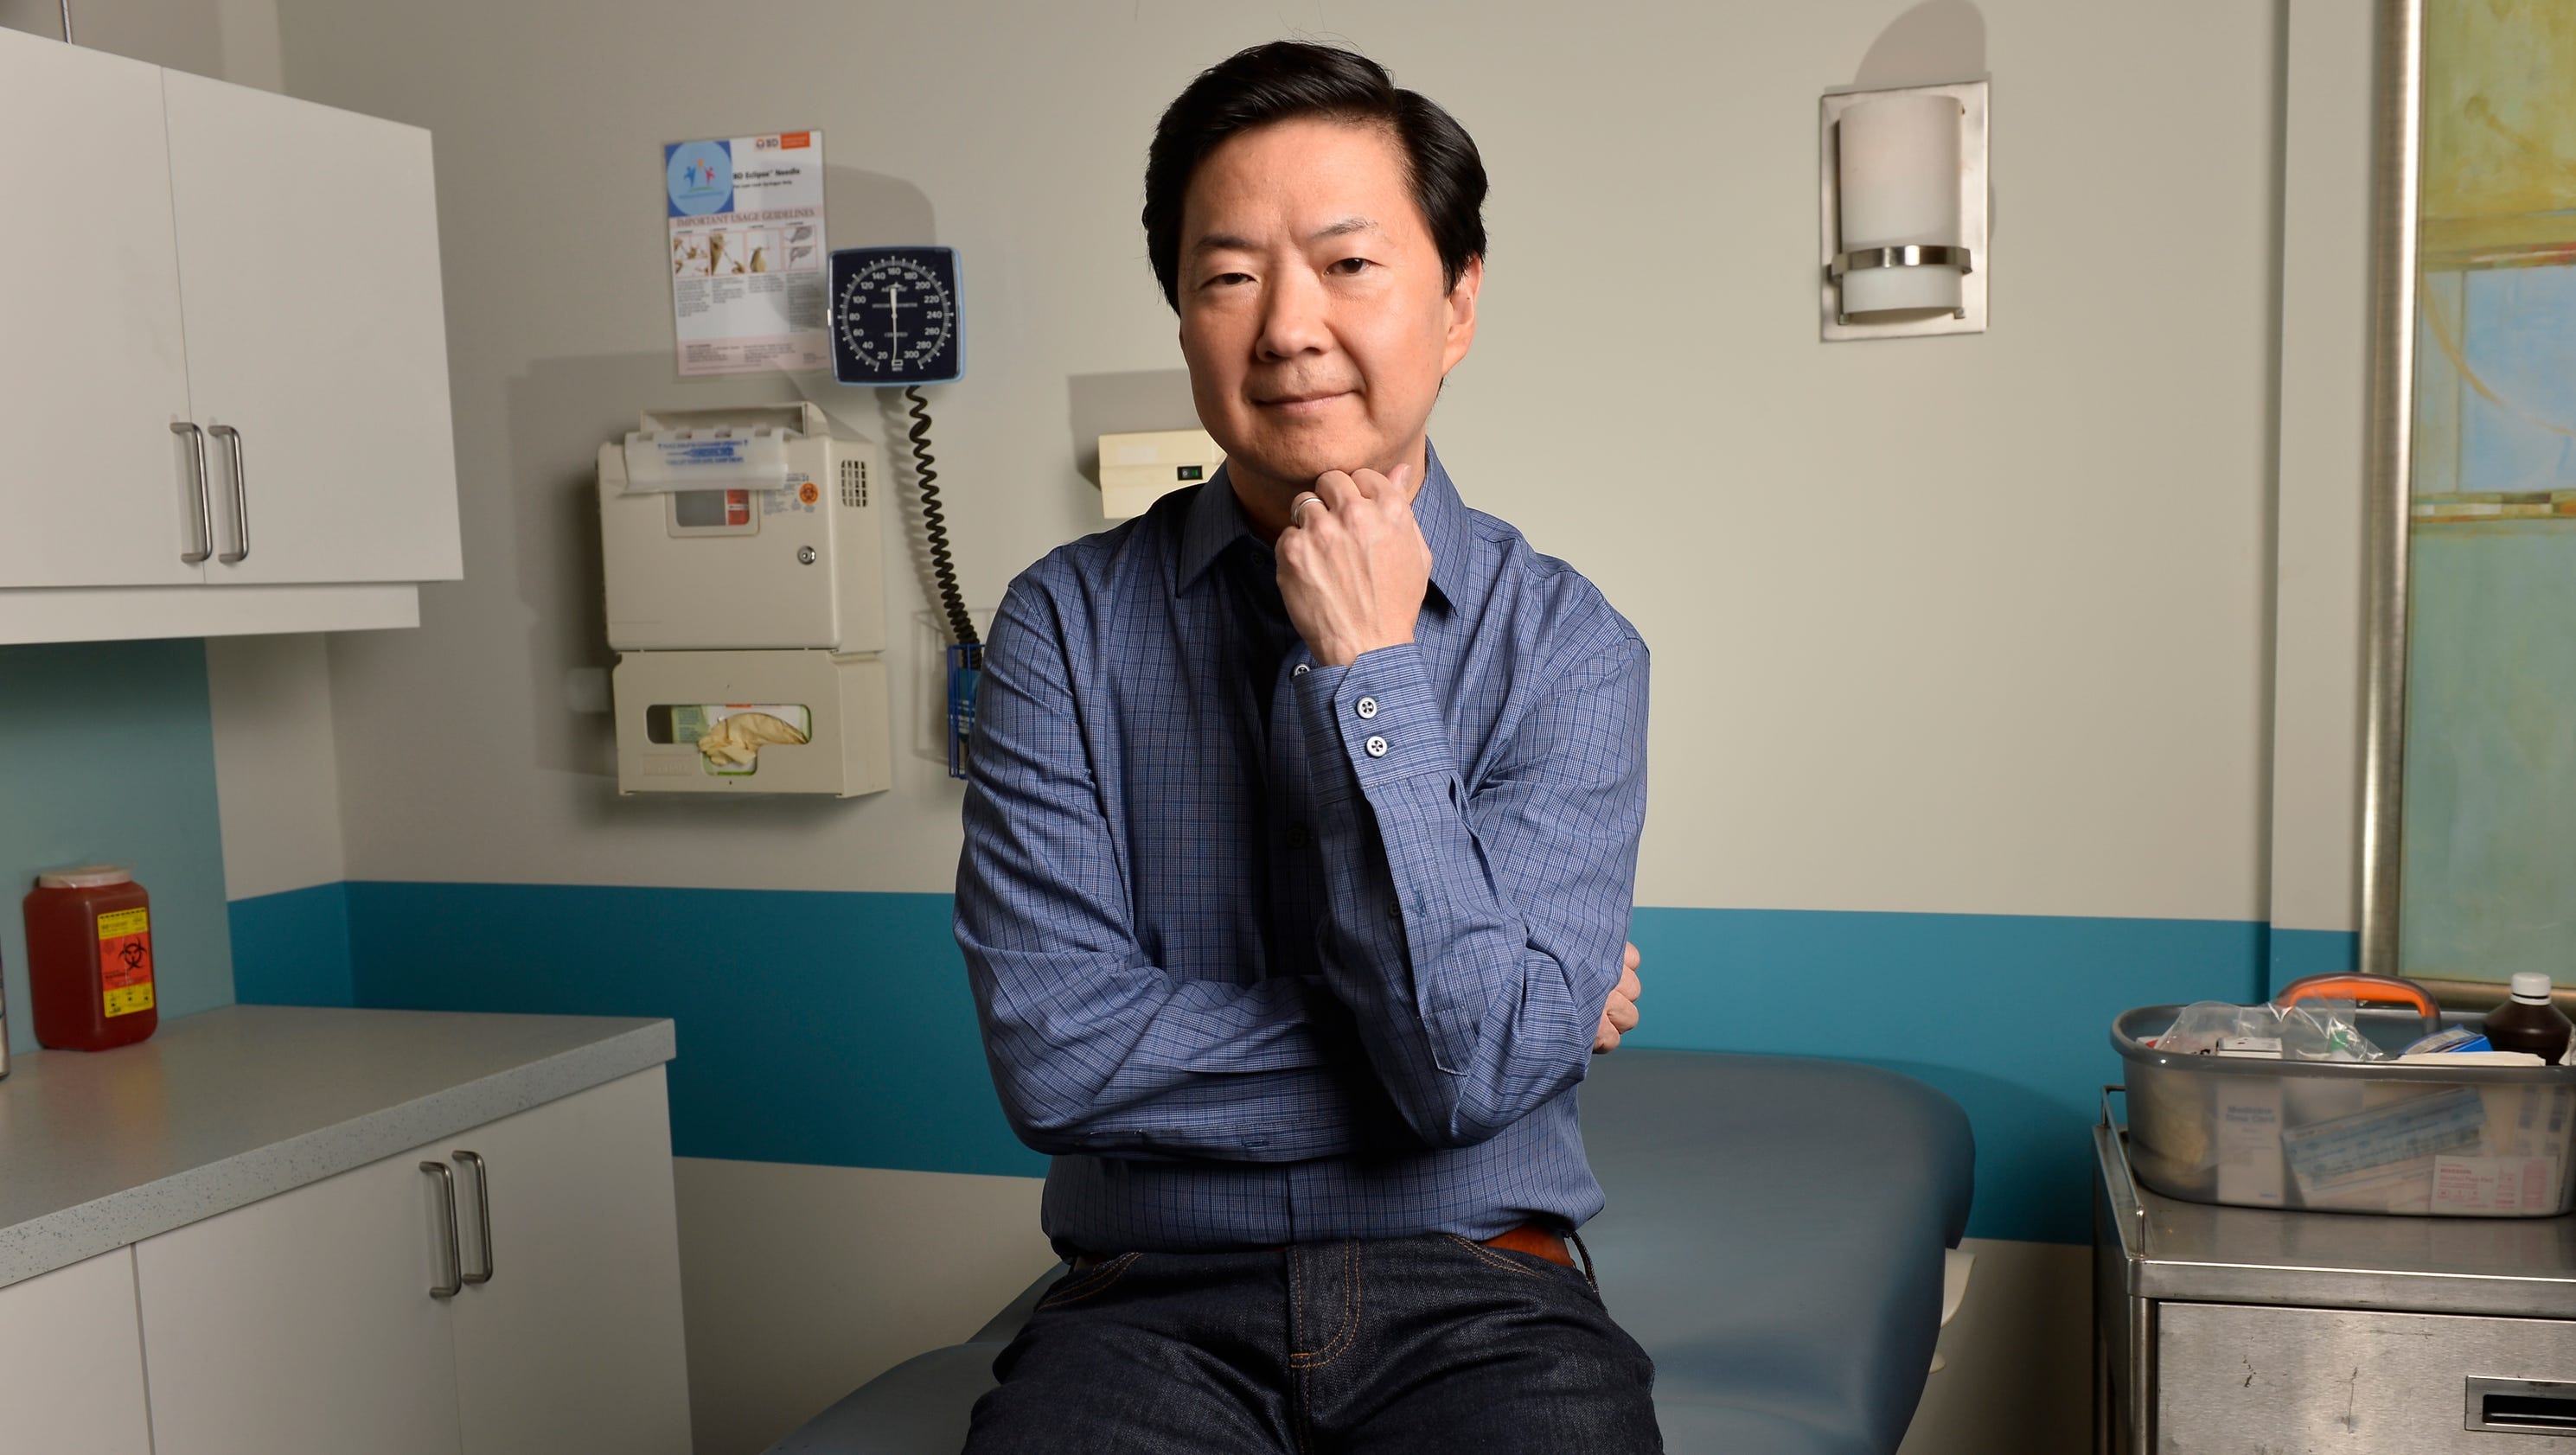 Ken Jeong halts comedy routine, jumps from stage to give audience member medical care